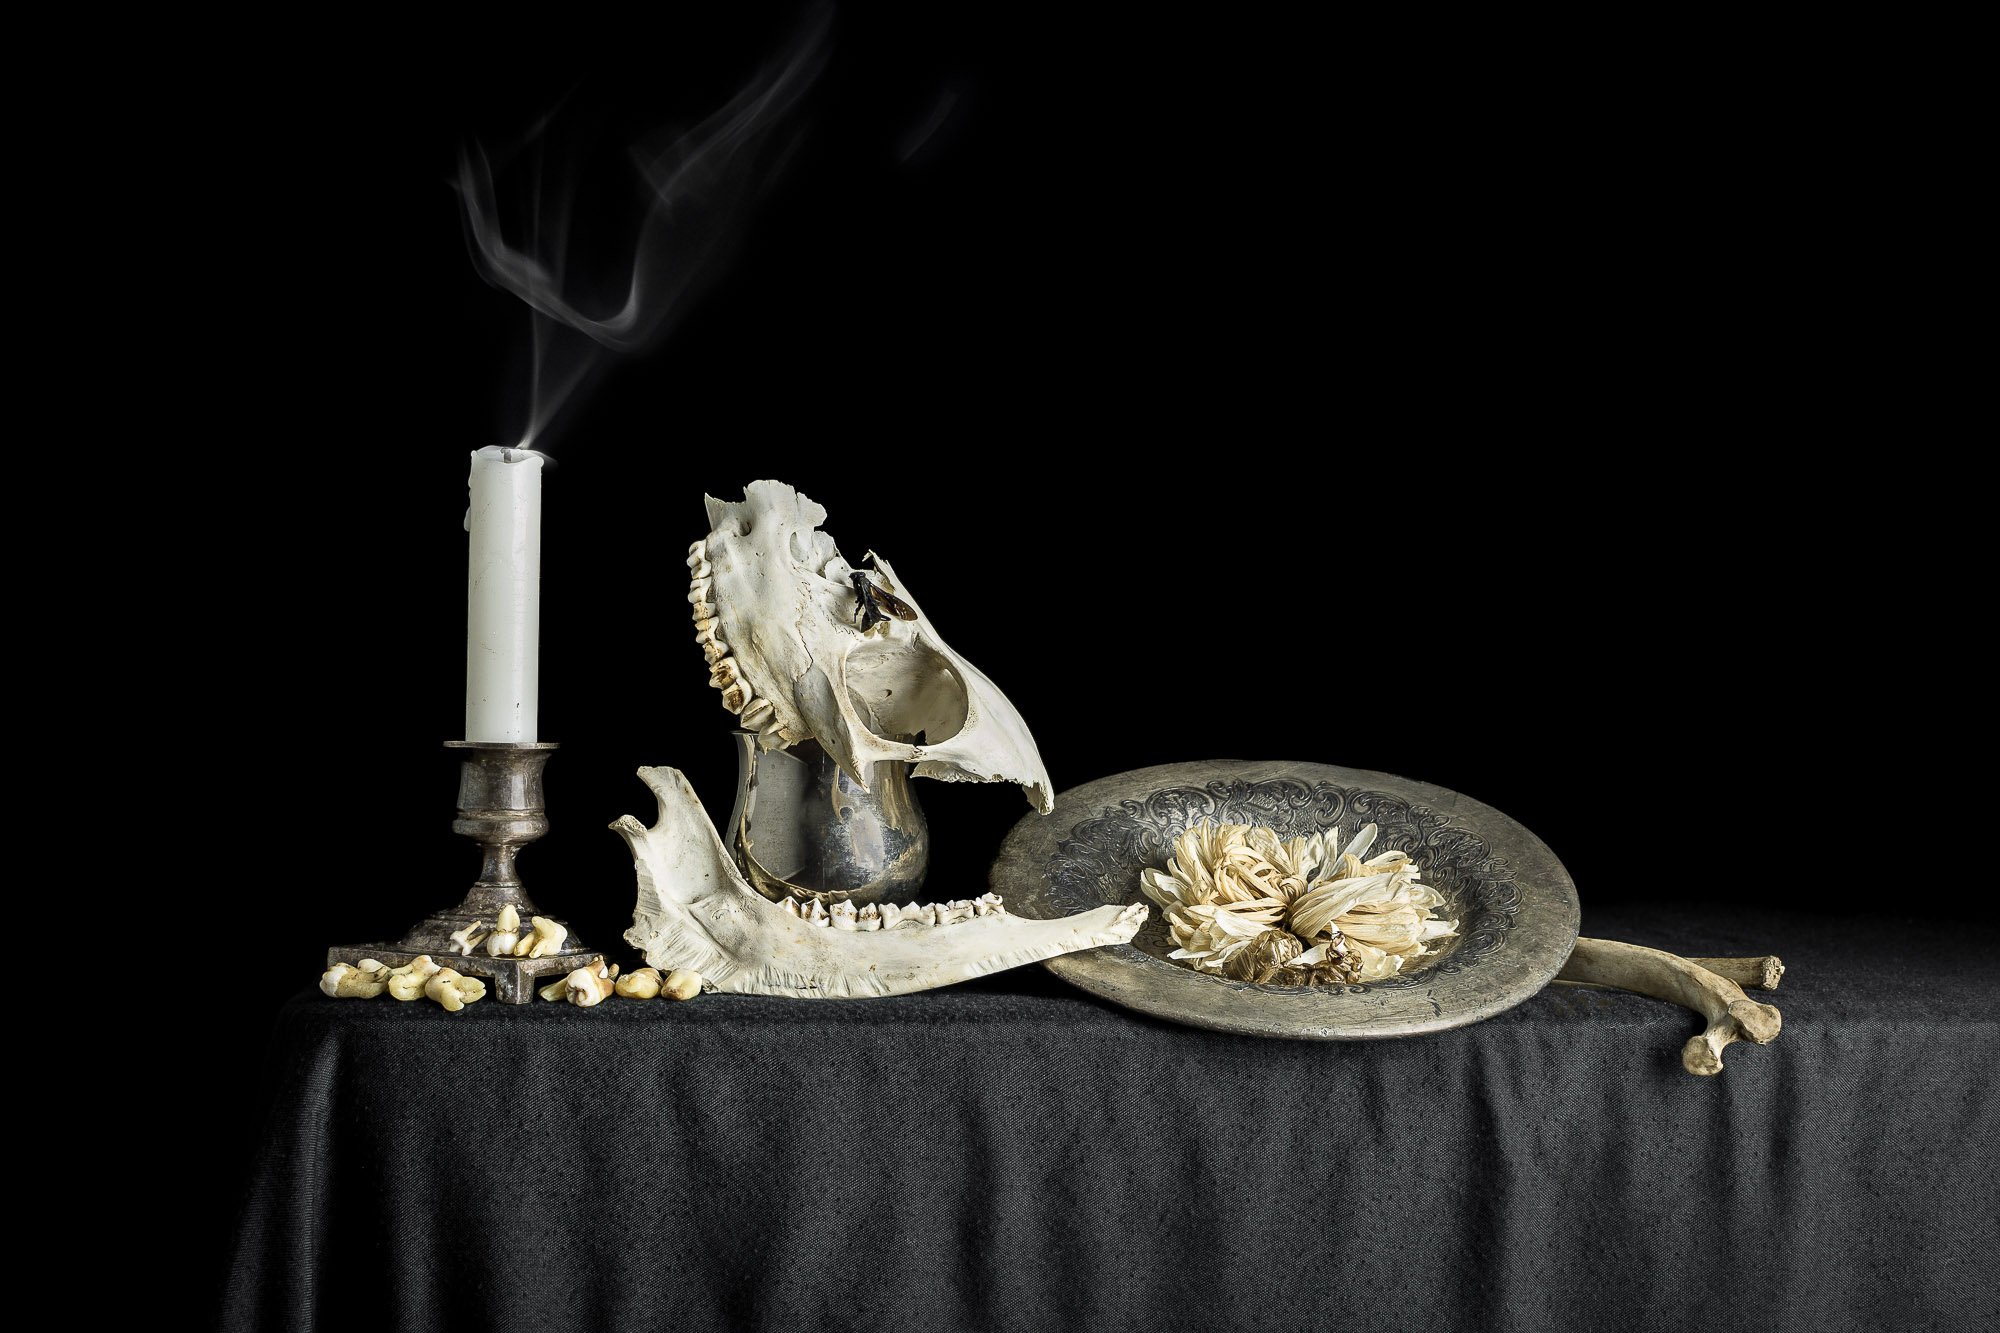 neal-auch-vanitas-with-bones-and-insects-2.jpg